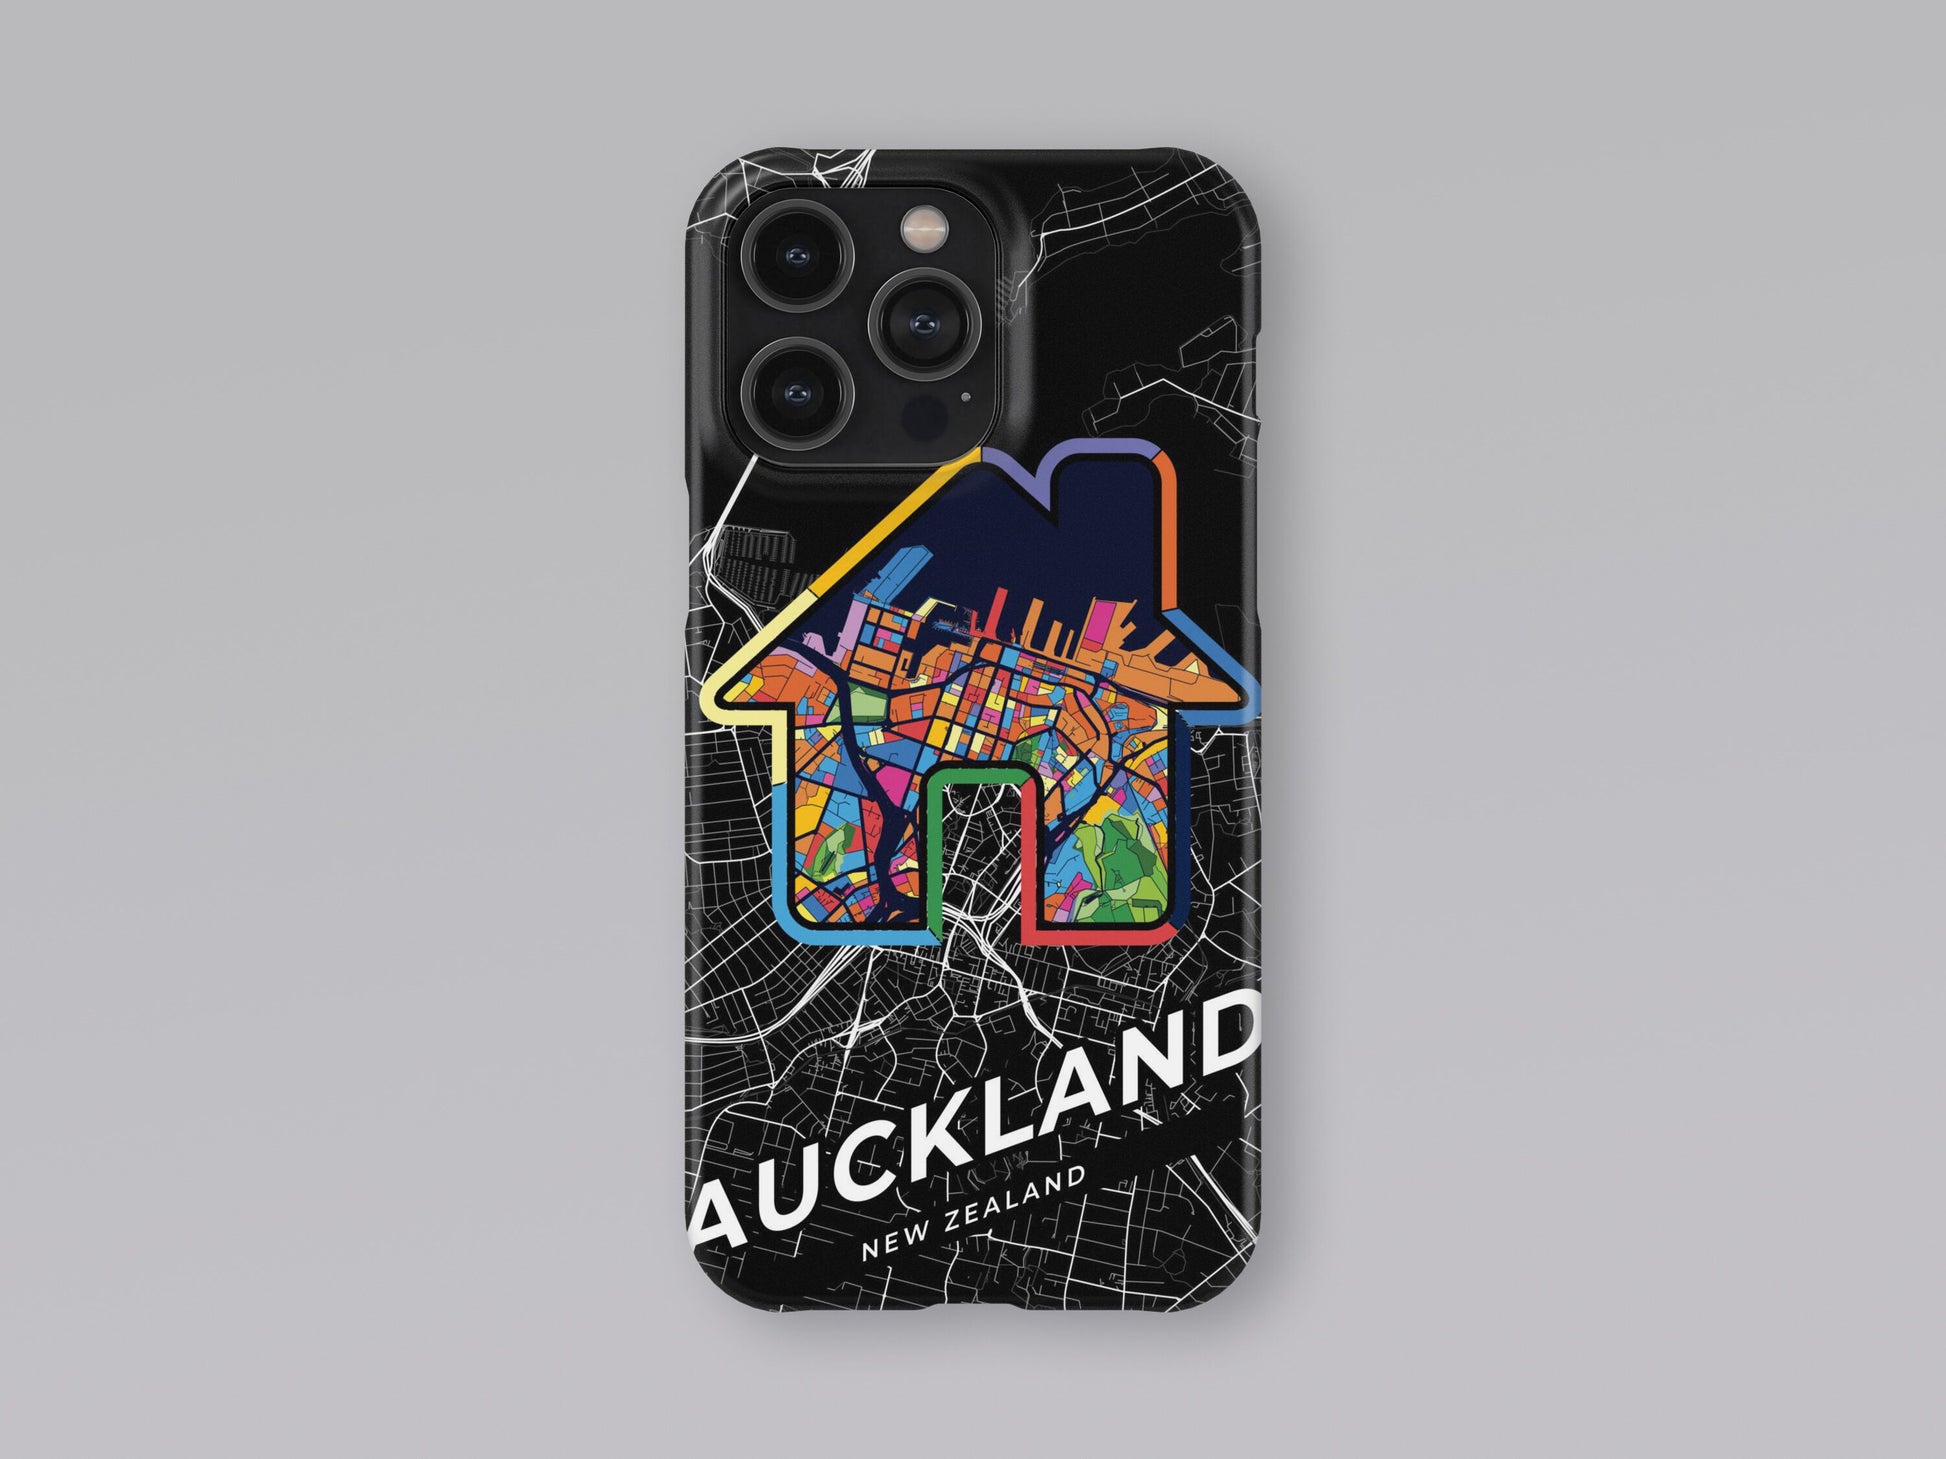 Auckland New Zealand slim phone case with colorful icon. Birthday, wedding or housewarming gift. Couple match cases. 3